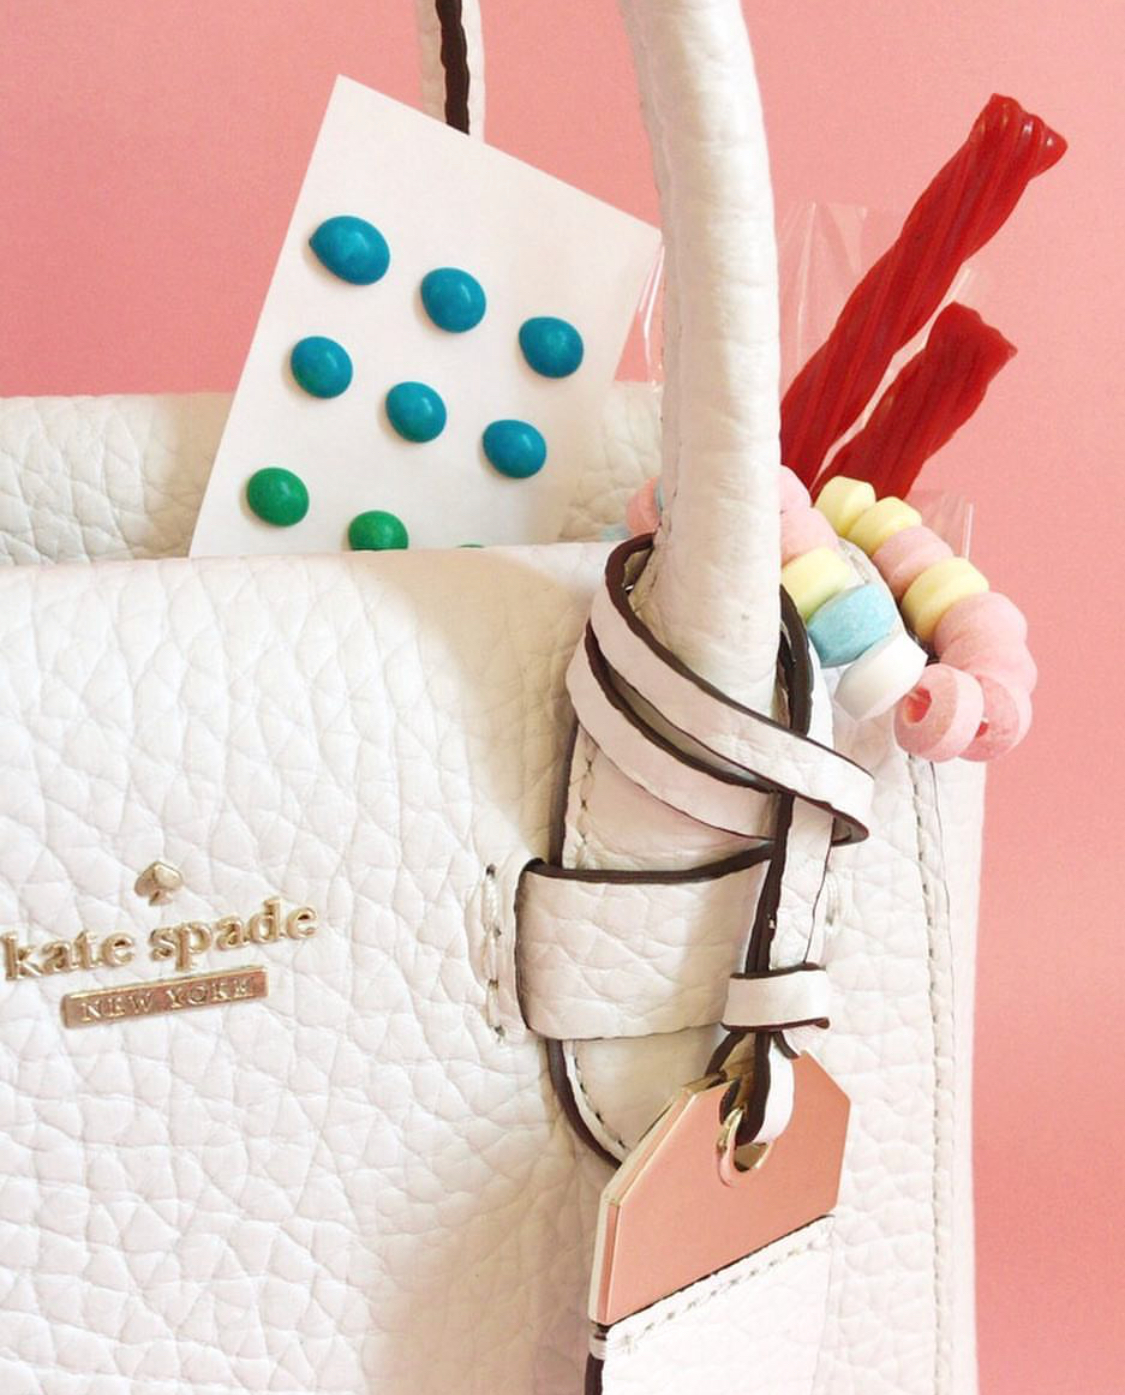  photograph and styling by Catherine Dash for Kate Spade New York 